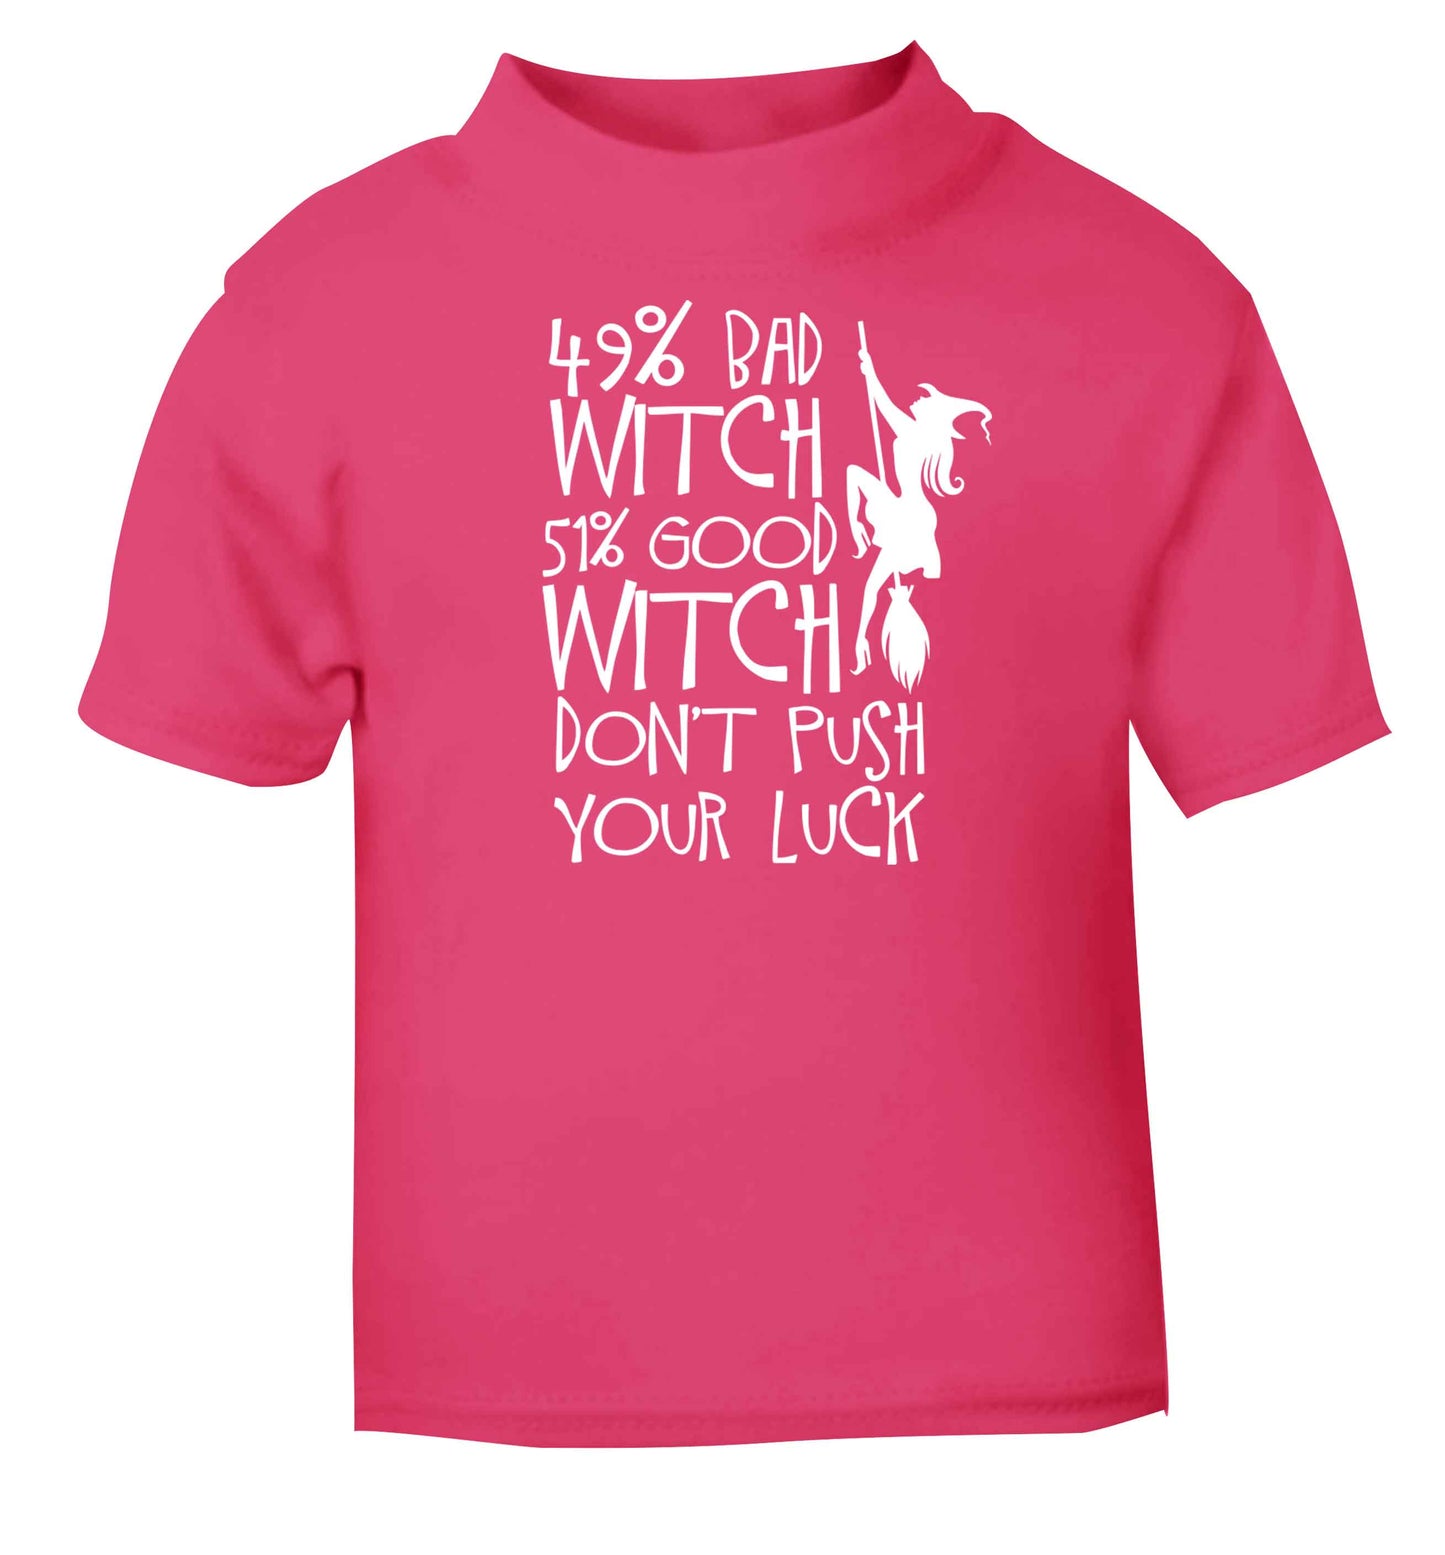 49% bad witch 51% good witch don't push your luck pink baby toddler Tshirt 2 Years